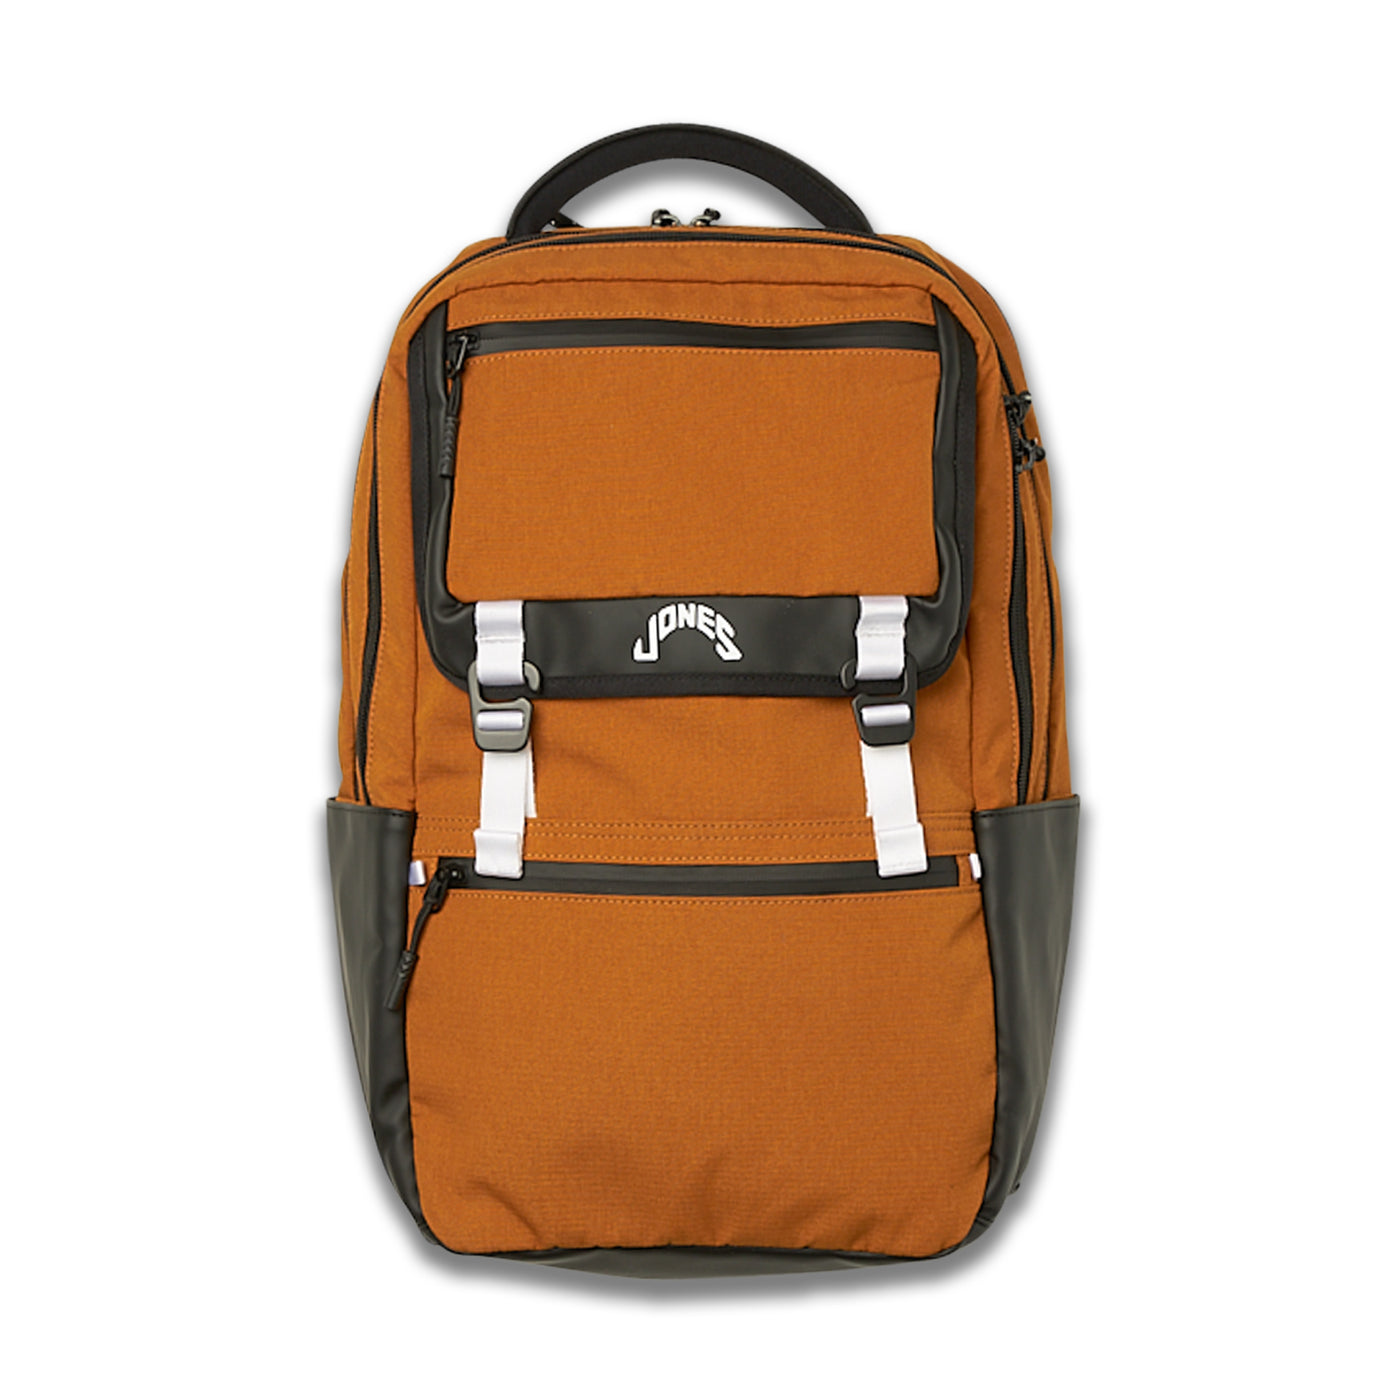 A2 Backpack R - Sienna